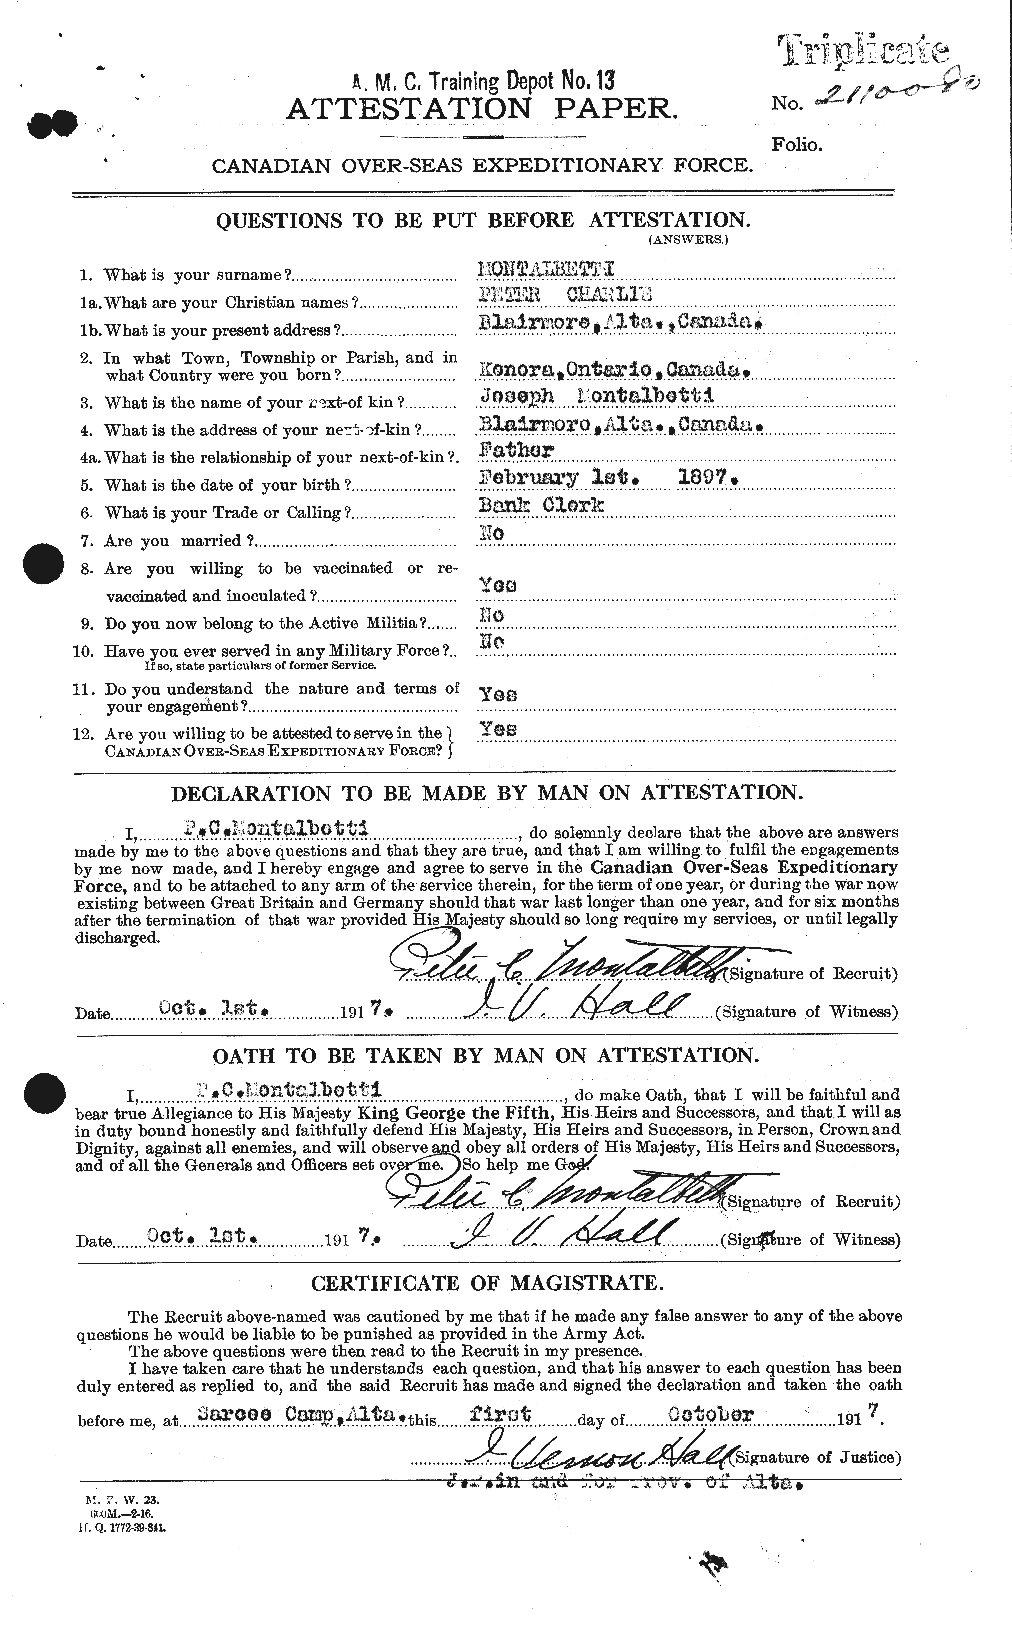 Personnel Records of the First World War - CEF 500197a